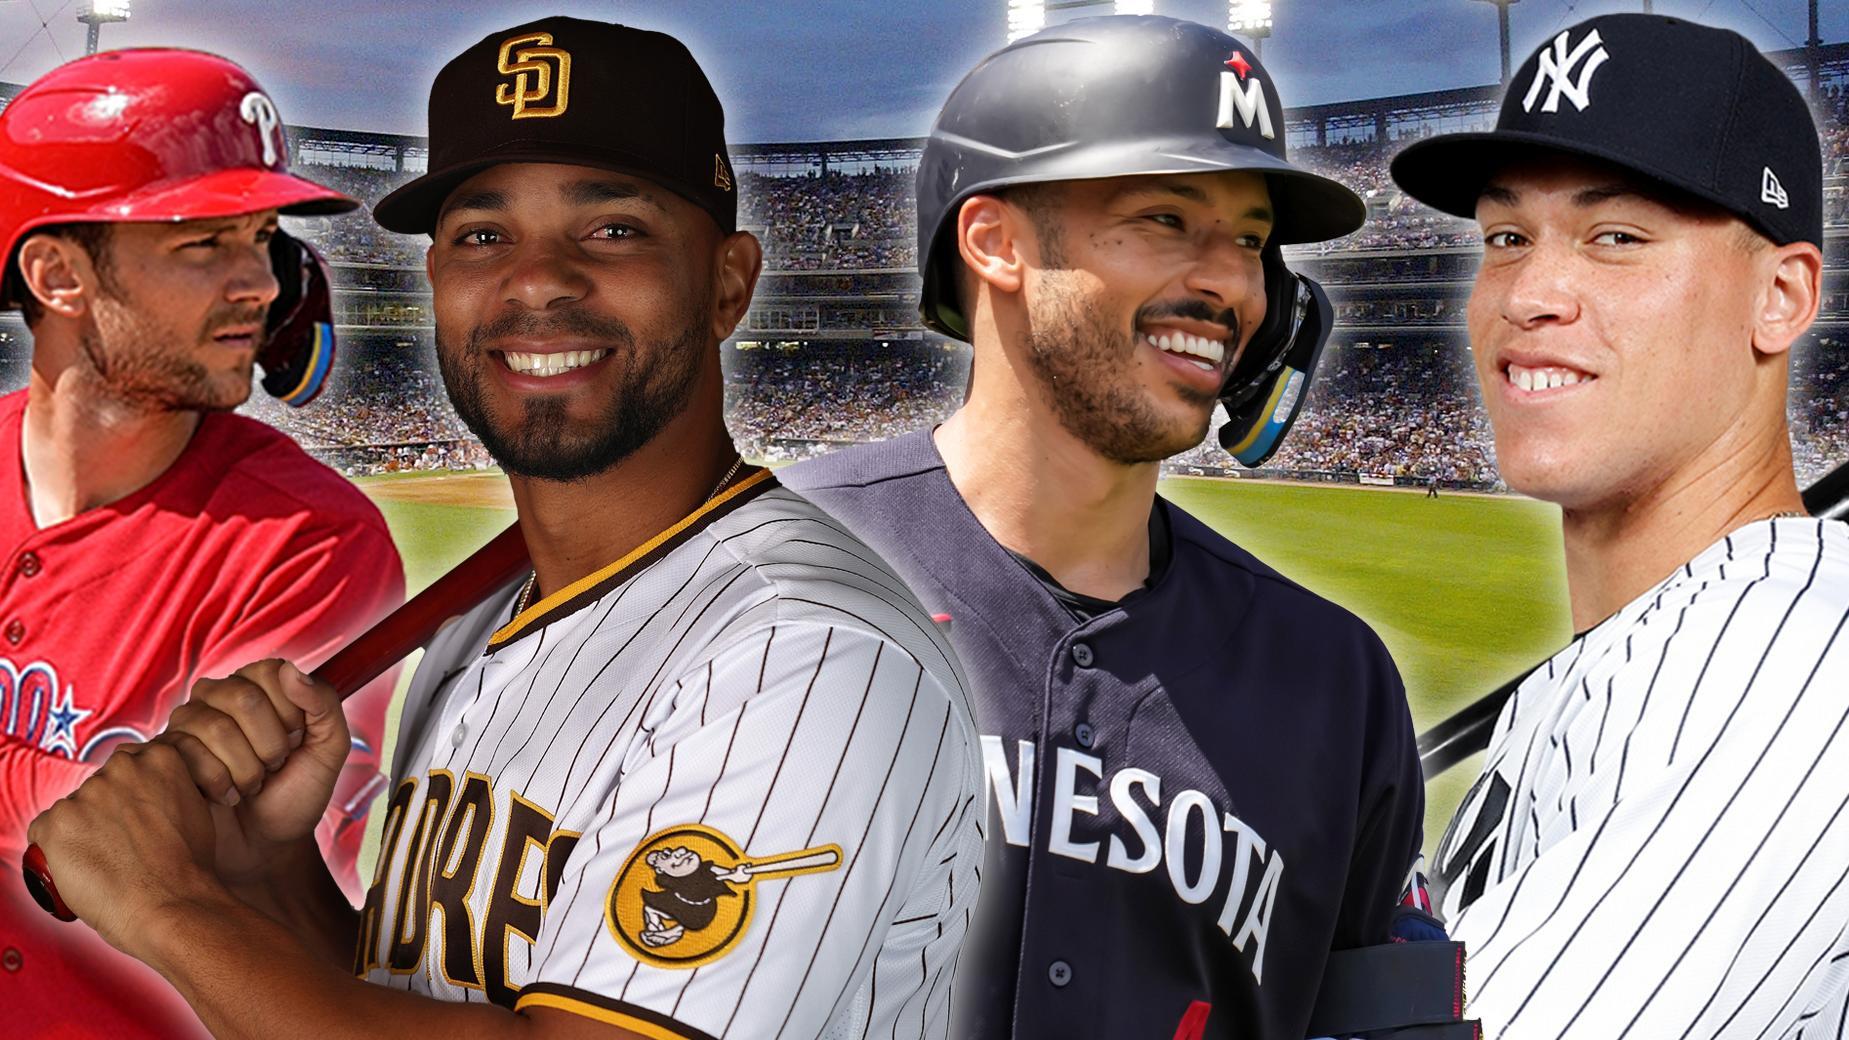 MLB debut players will have special patches on jerseys